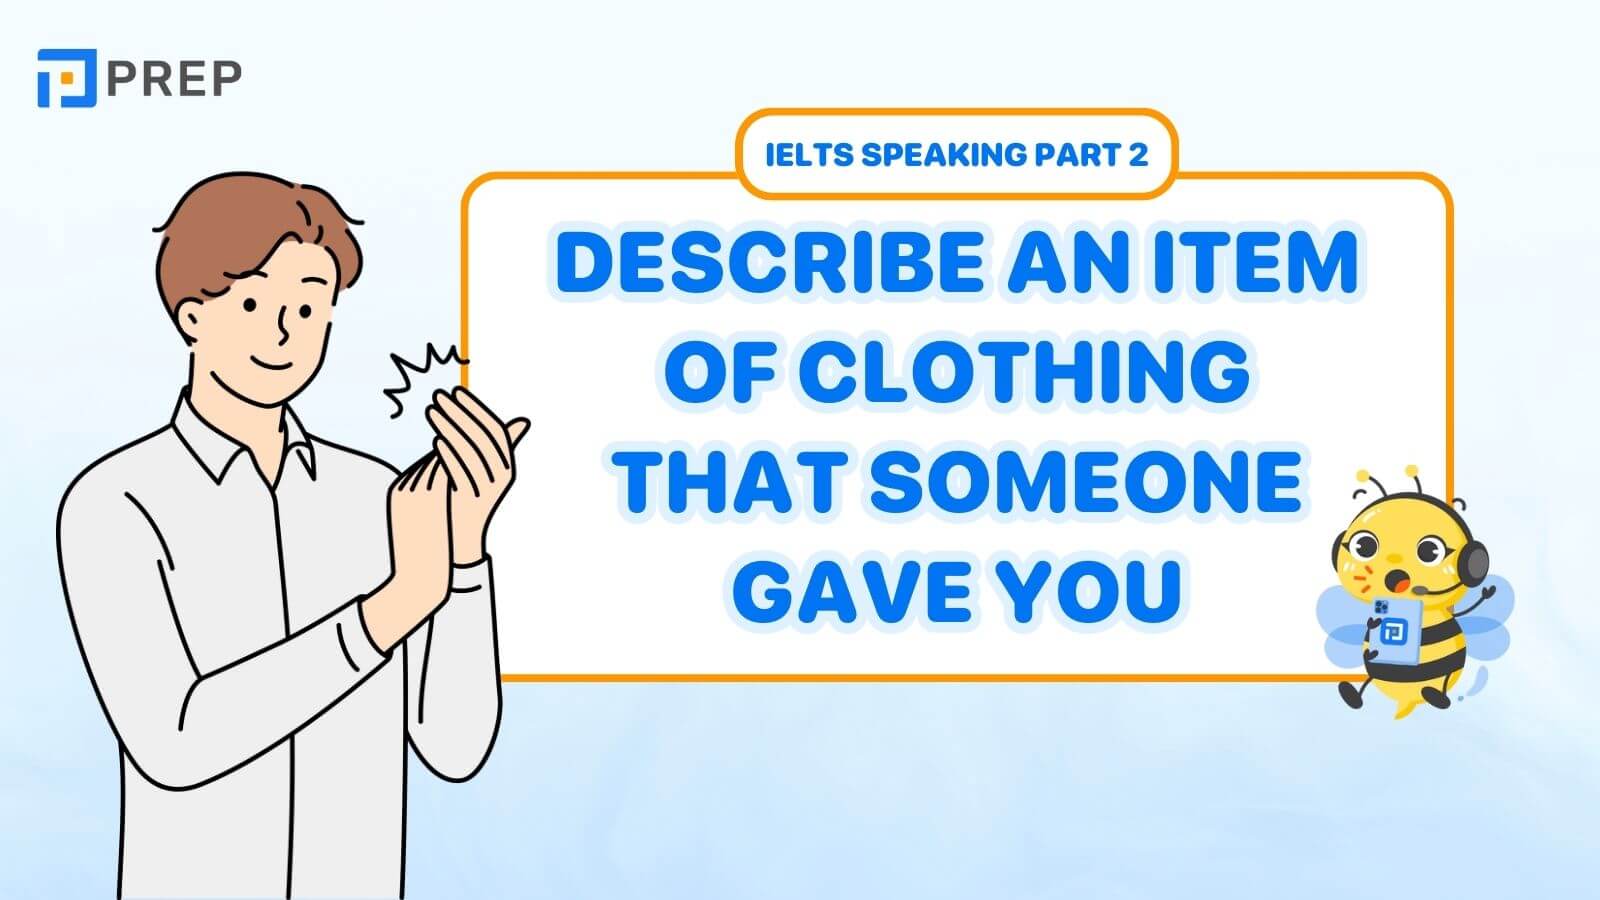 Describe an item of clothing that someone gave you